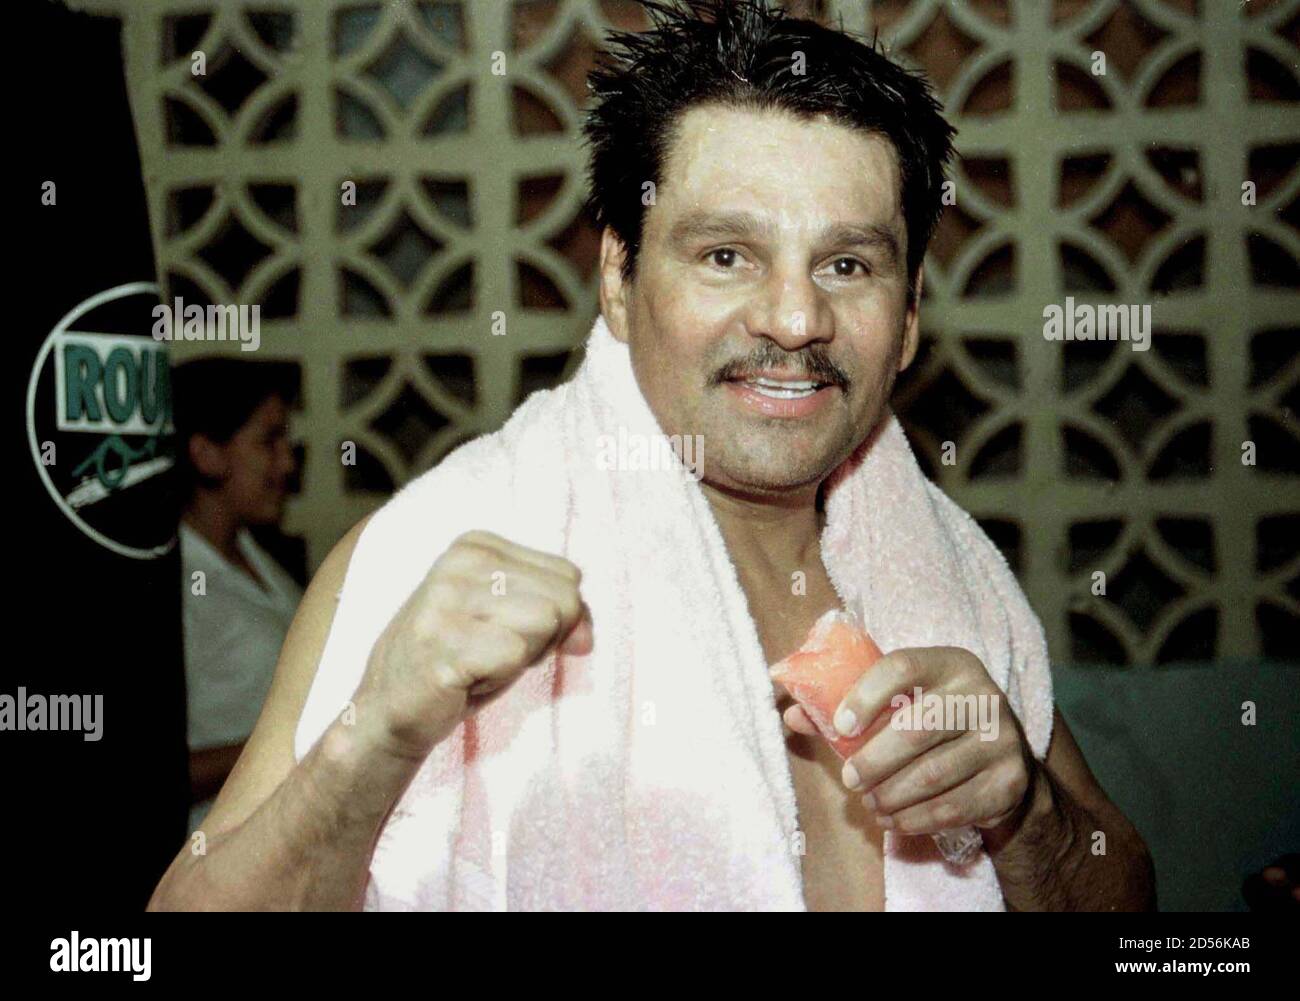 Roberto 'Hands of Stone' Duran poses at a Panama City training camp, May 25. Duran, 48, is preparing to extend his 117-fight career into a record fifth decade in a June 16 title fight against San Francisco-based Pat Lawlor. At stake is the vacant National Boxing Association super-middleweight crown. PANAMA OUT.  TG/LSD Stock Photo